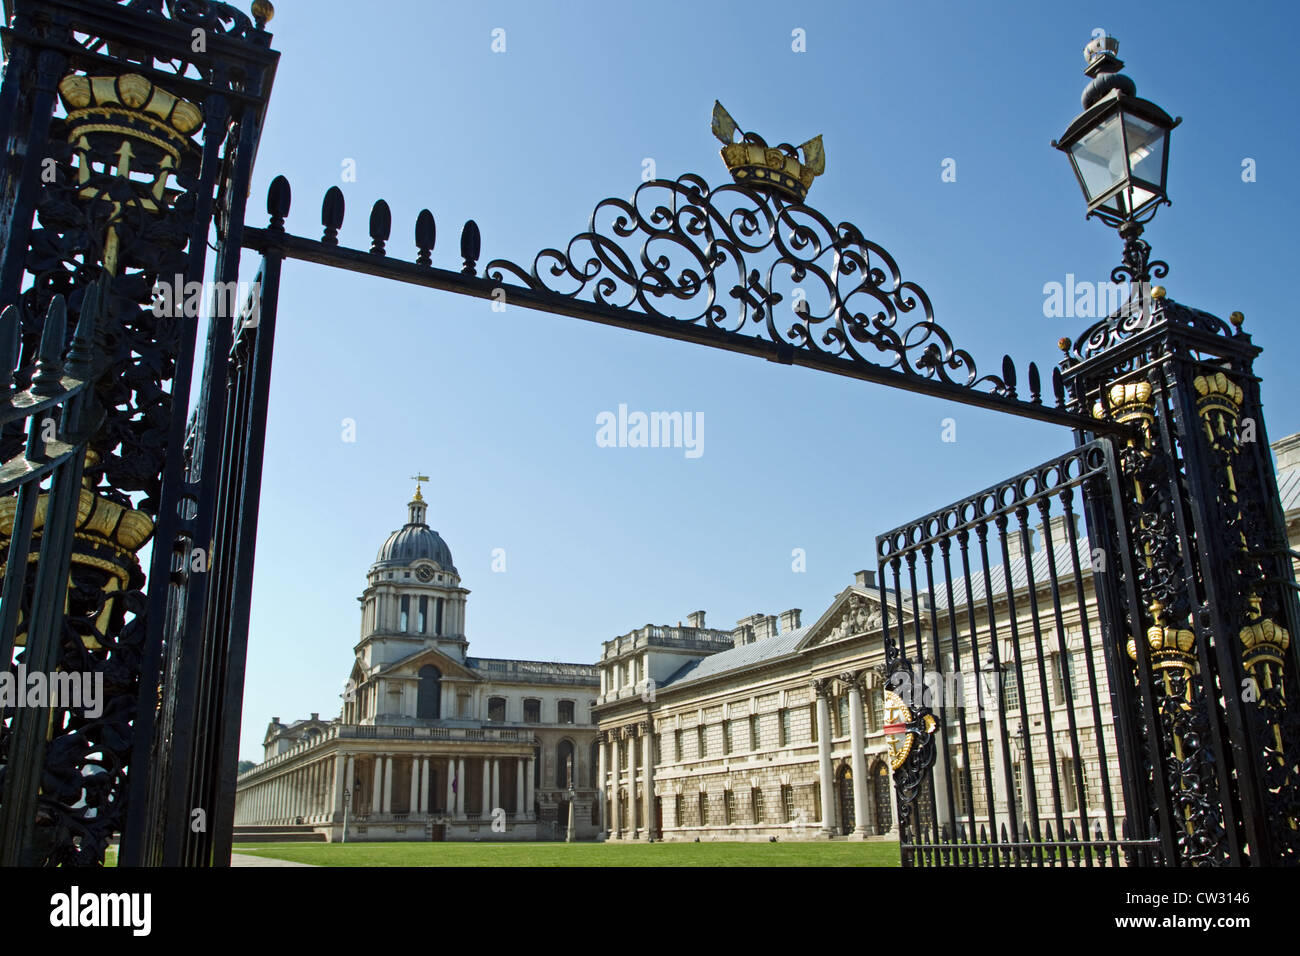 Old Royal Naval College in Greenwich, London, Sonntag, 27. Mai 2012. Stockfoto